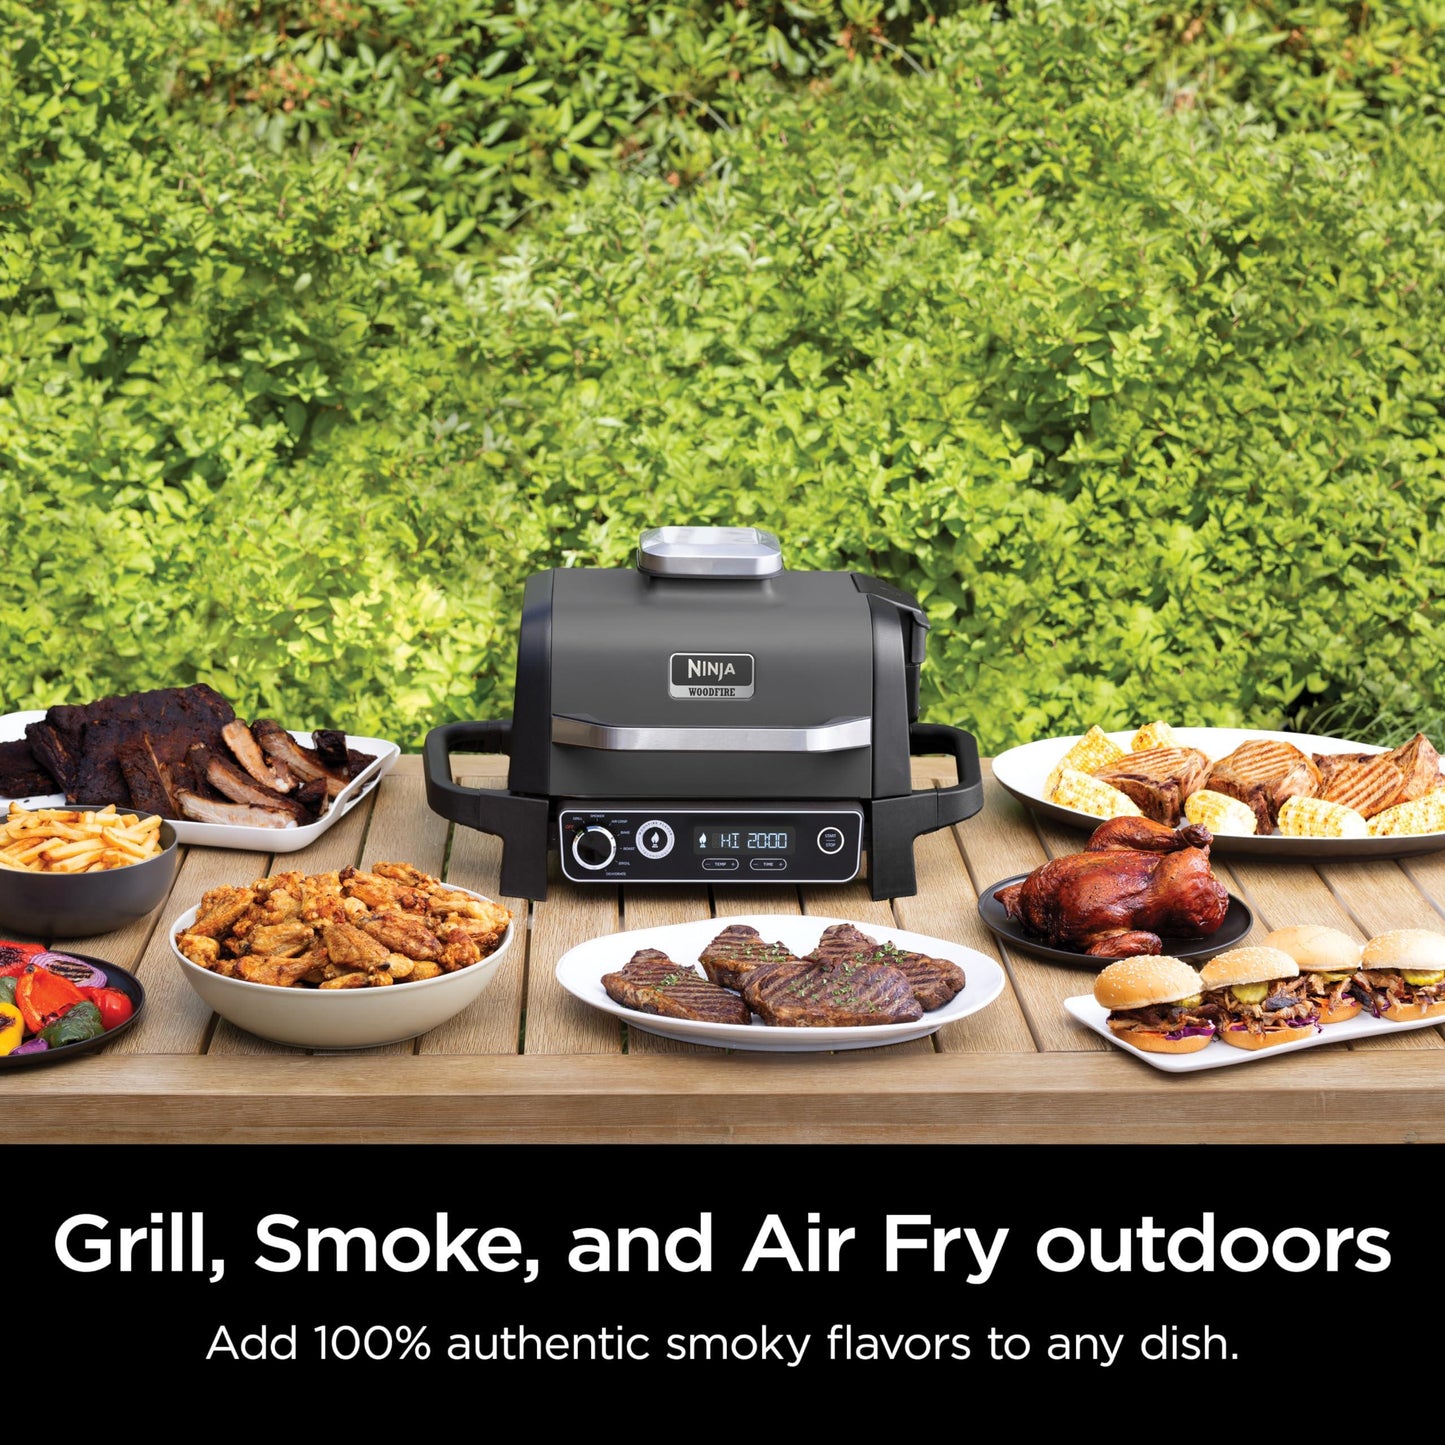 Ninja OG701 Woodfire Outdoor Grill & Smoker, 7-in-1 Master Grill, BBQ Smoker, & Air Fryer plus Bake, Roast, Dehydrate, & Broil, uses Ninja Woodfire Pellets, Weather-Resistant, Portable, Electric, Grey - CookCave